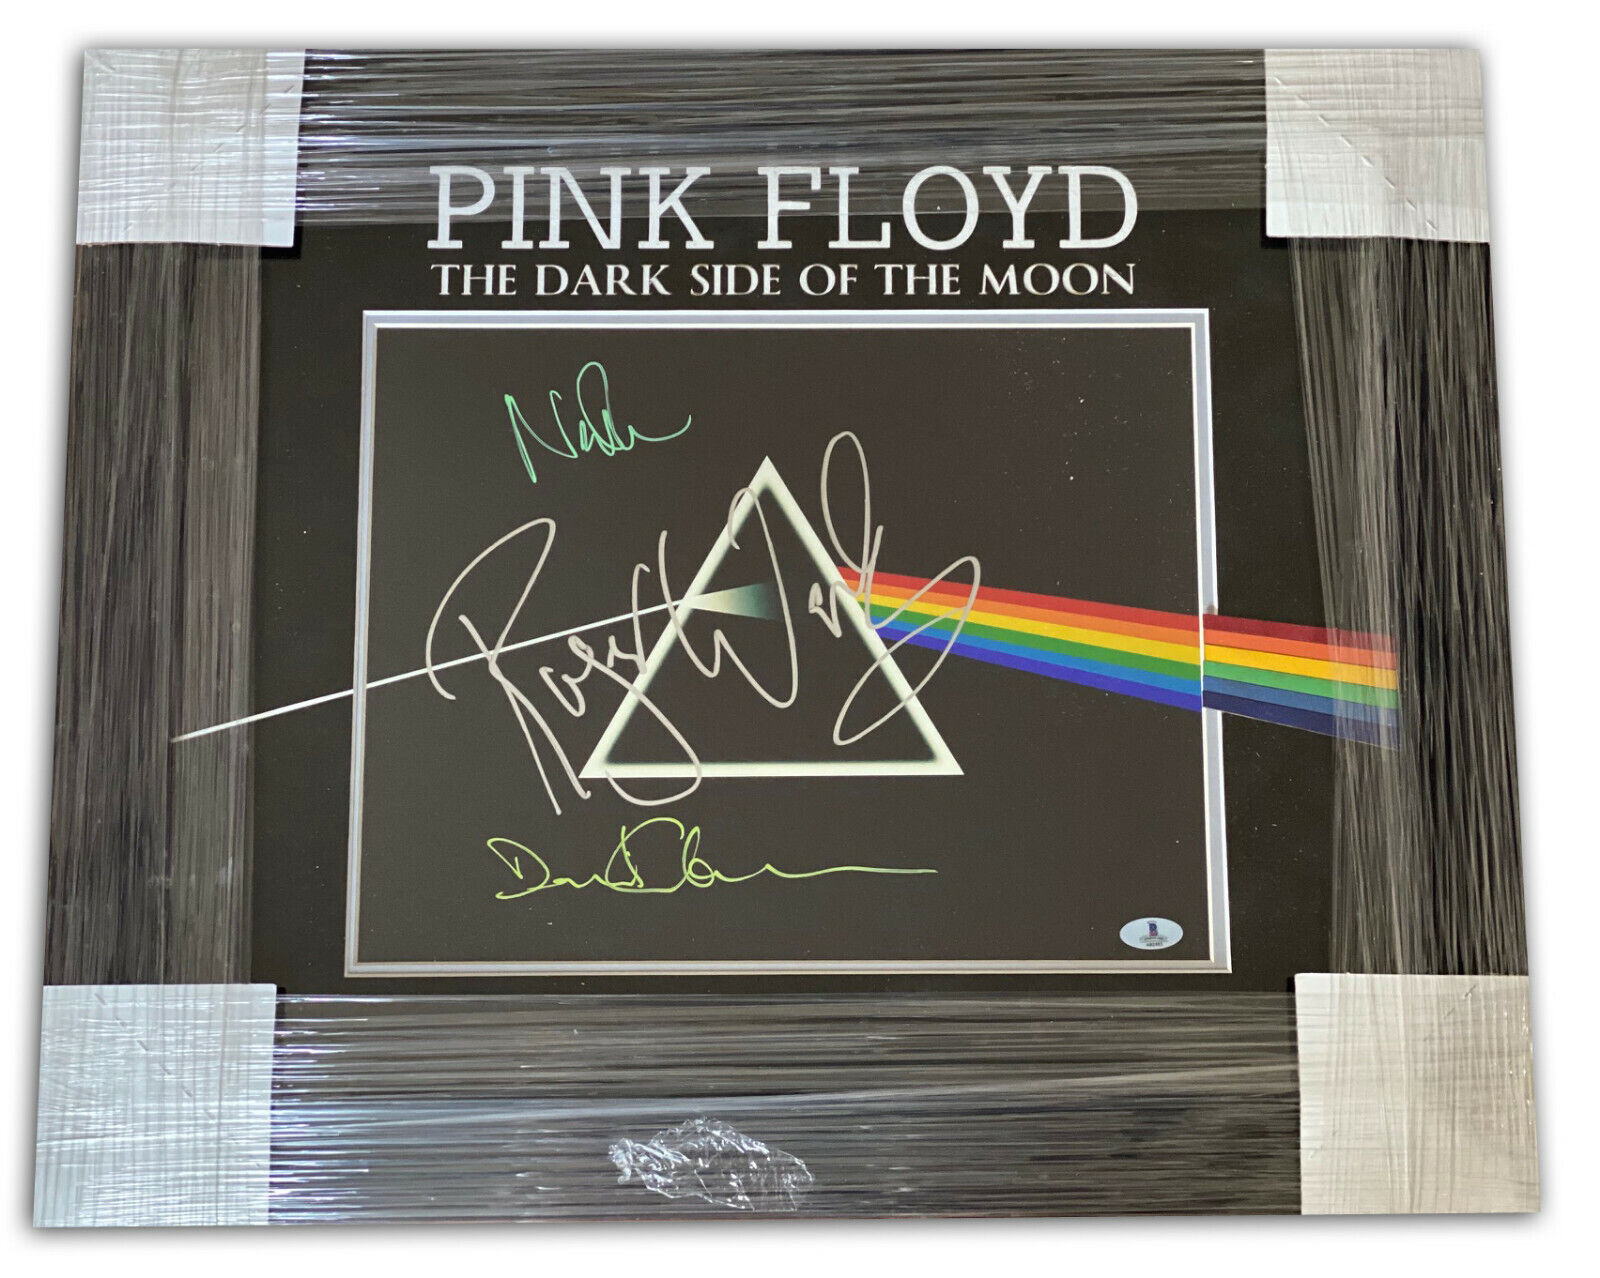 ROGER WATERS DAVID GILMOUR NICK MASON SIGNED AUTO PINK FLOYD 11X14 PHOTO BECKETT